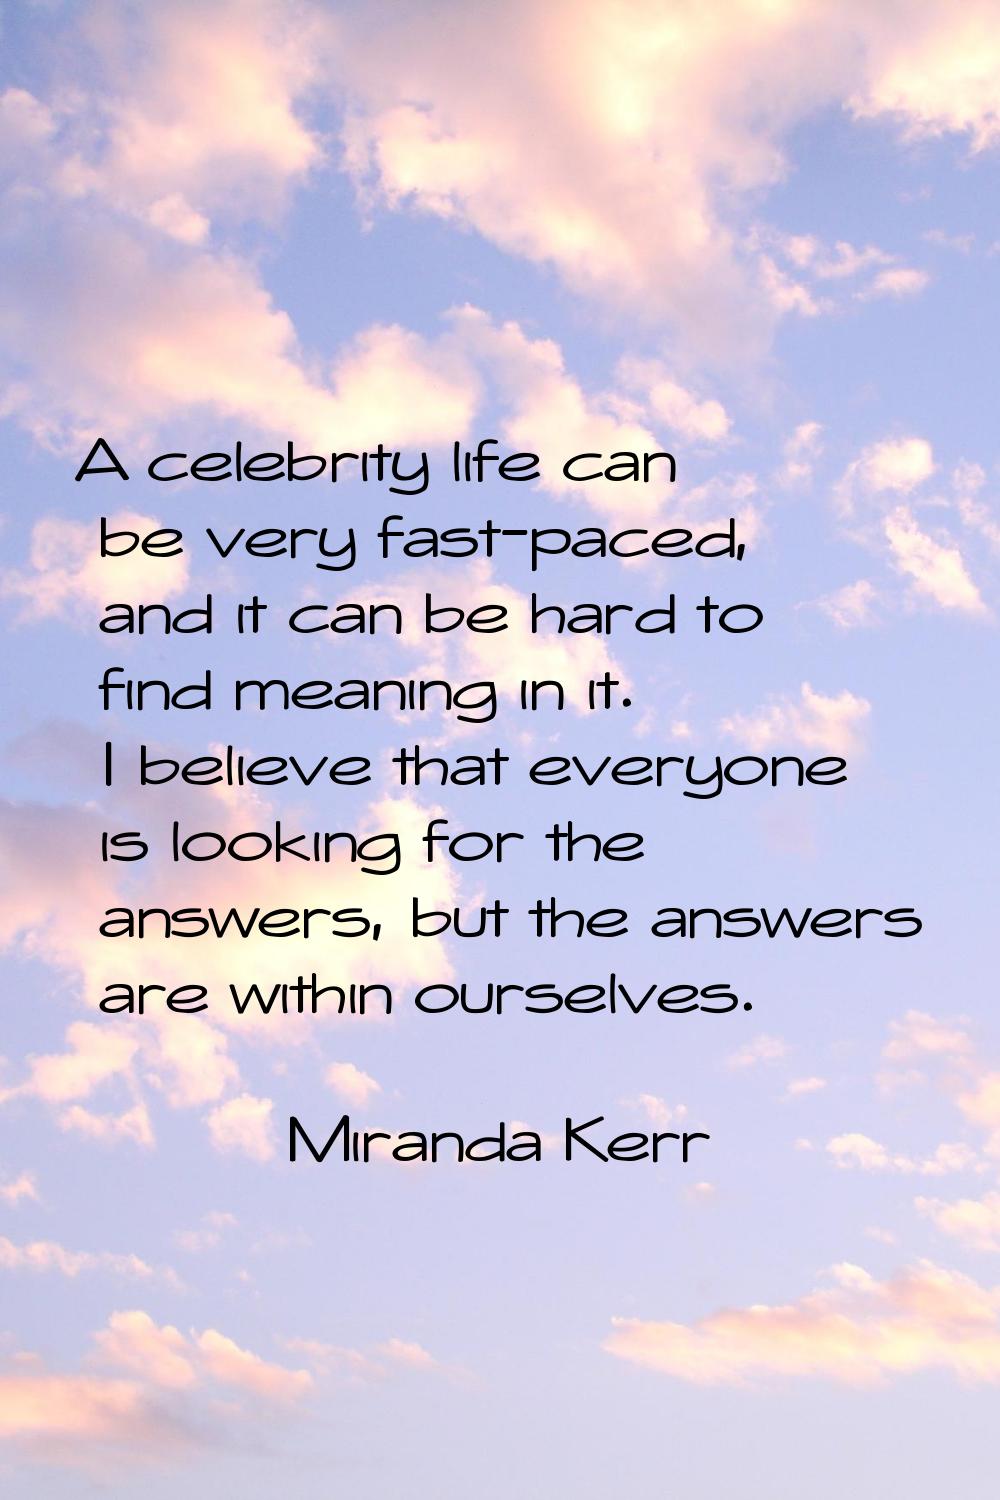 A celebrity life can be very fast-paced, and it can be hard to find meaning in it. I believe that e